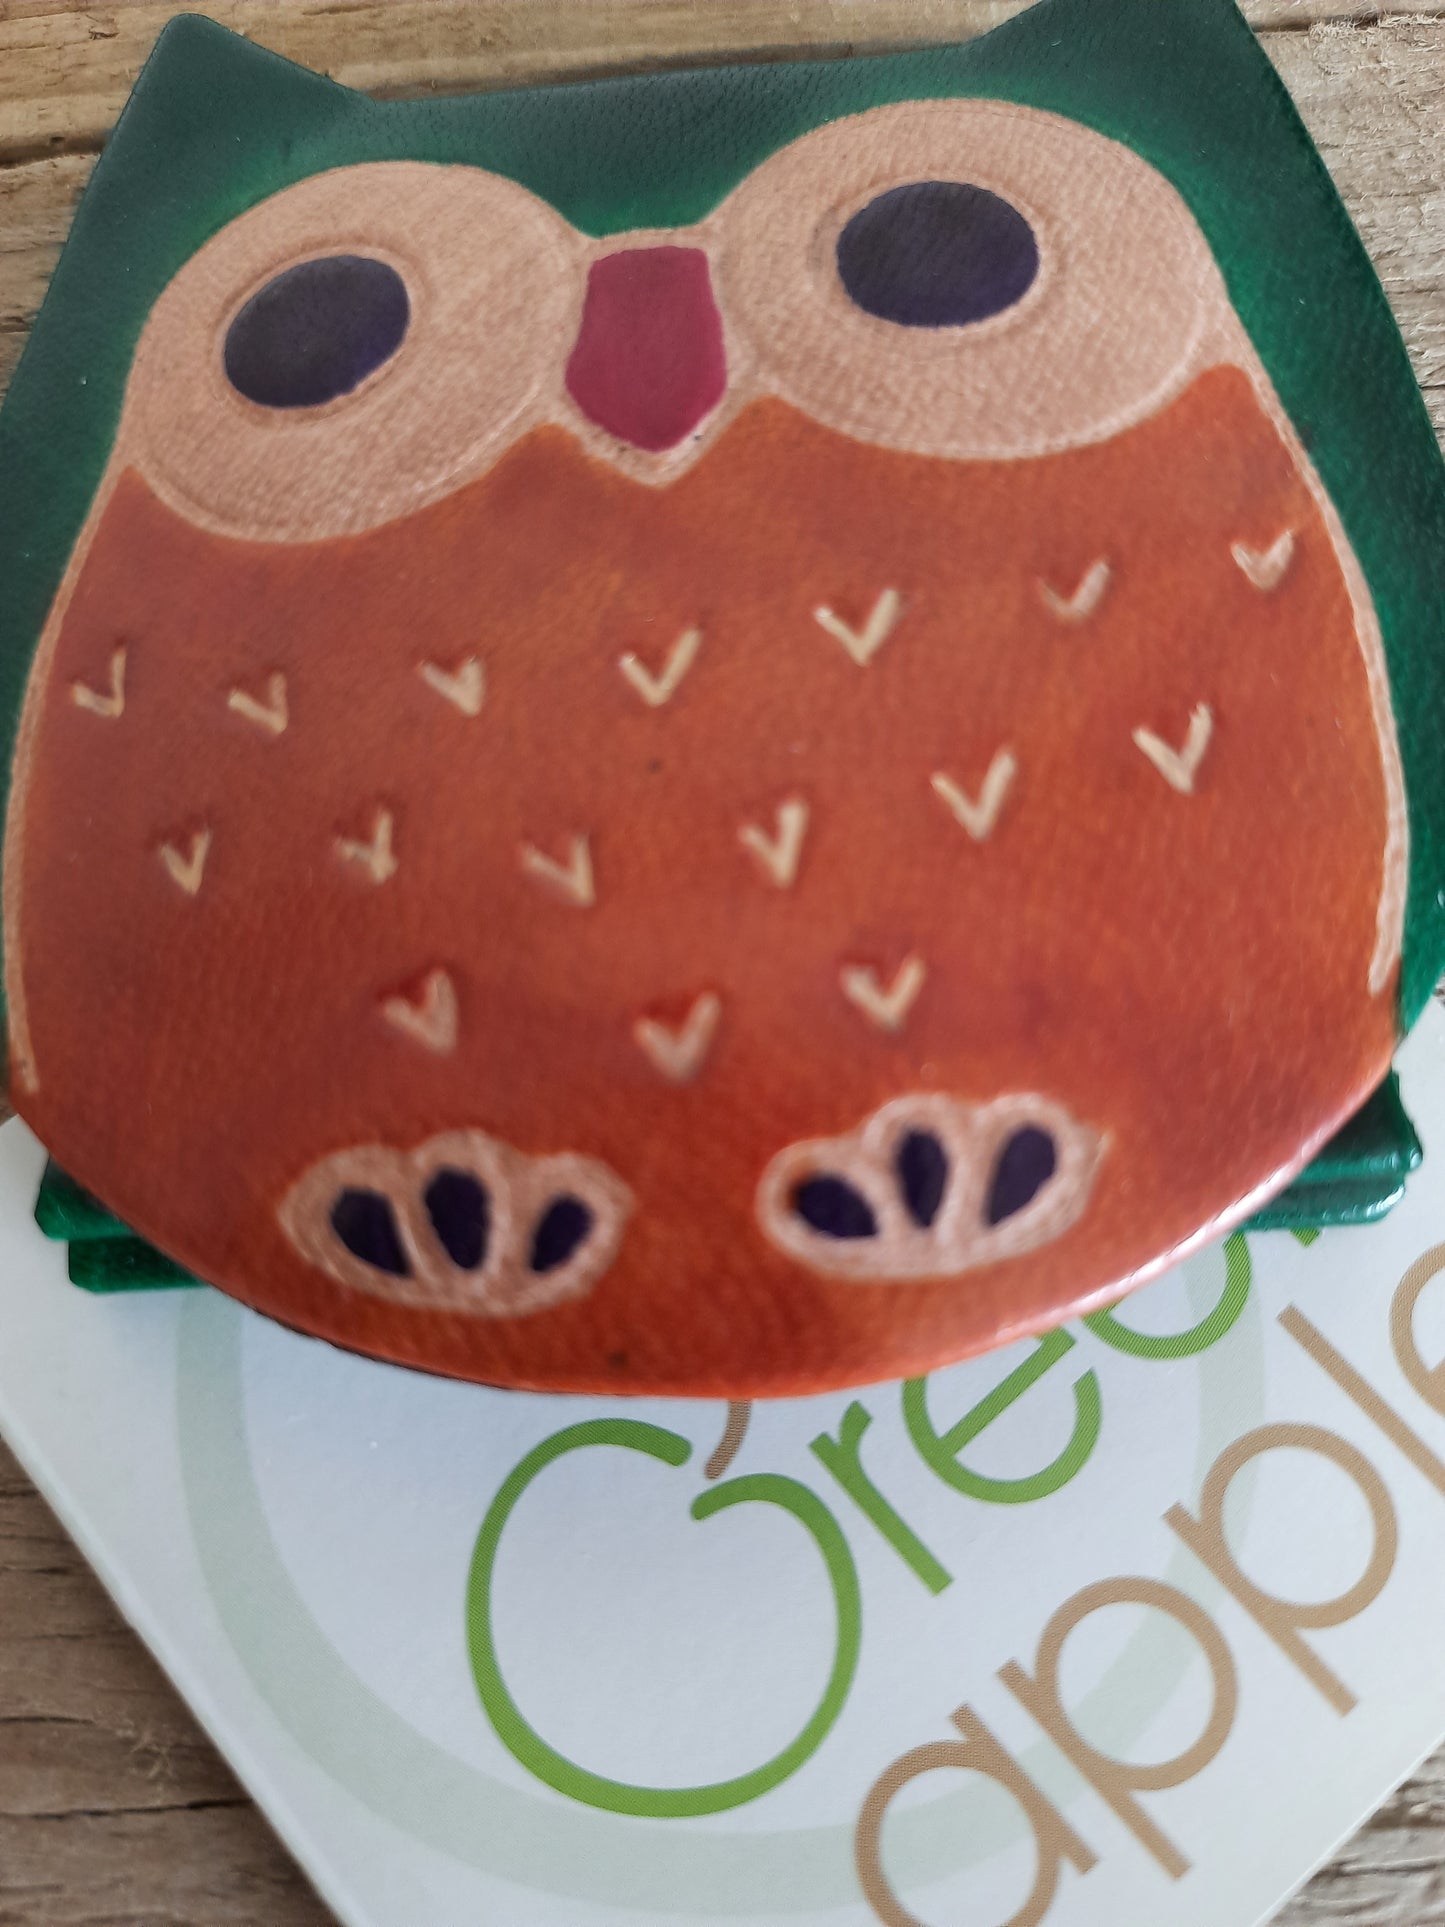 Fair Trade Owl Purse | Ethical Gifts For Her | Fair Trade Items | Eco Shop Online